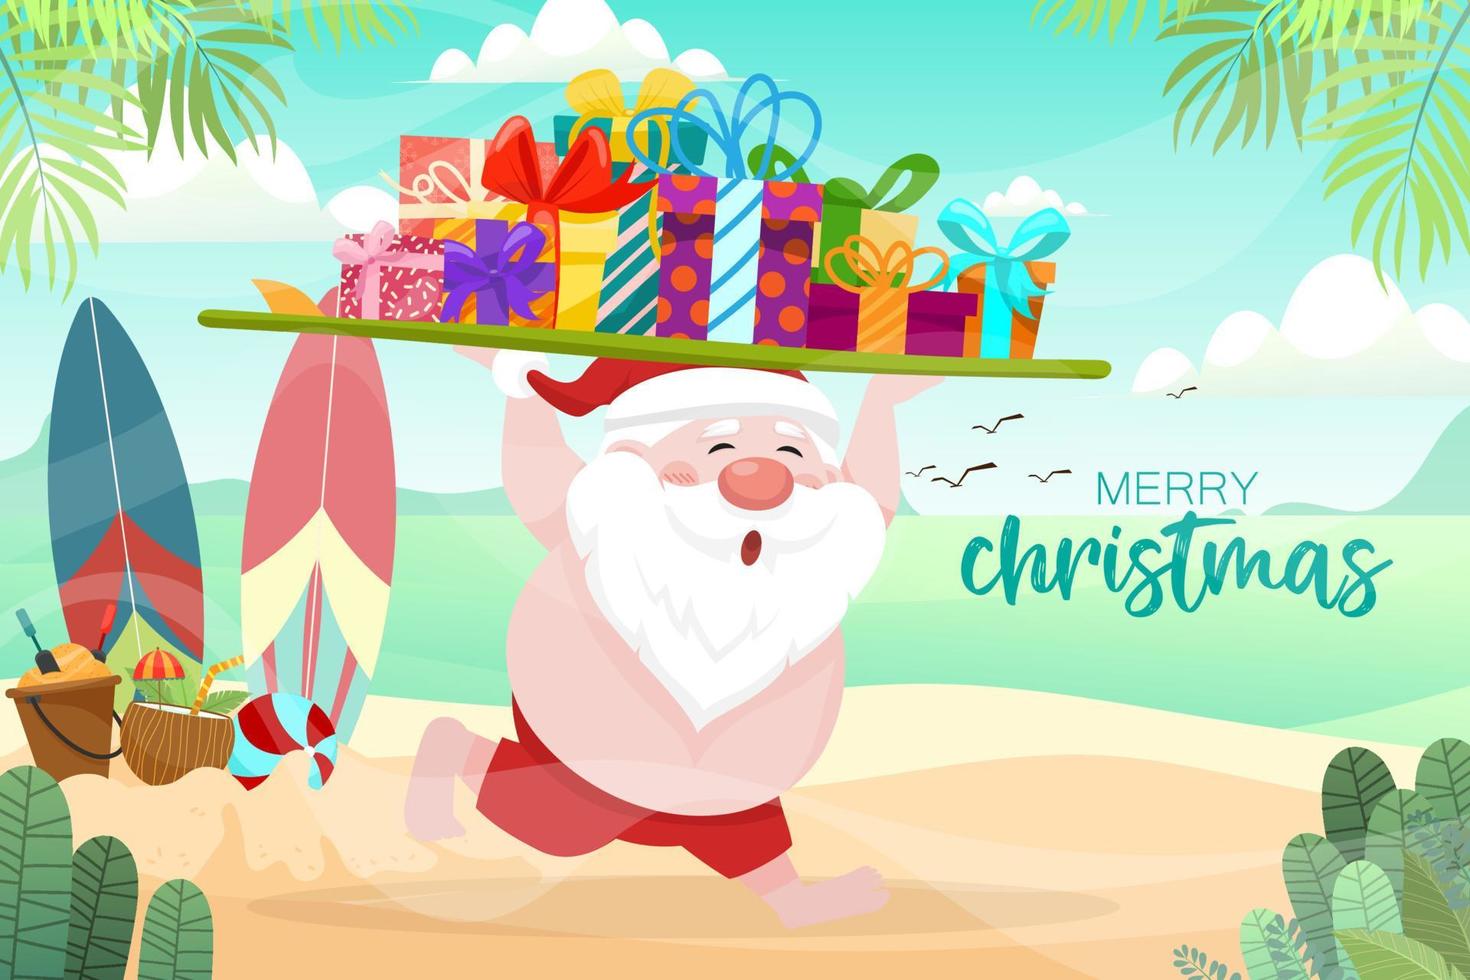 Santa Claus wearing swim suit and carrying a surfboard with gift boxes running on the beach vector